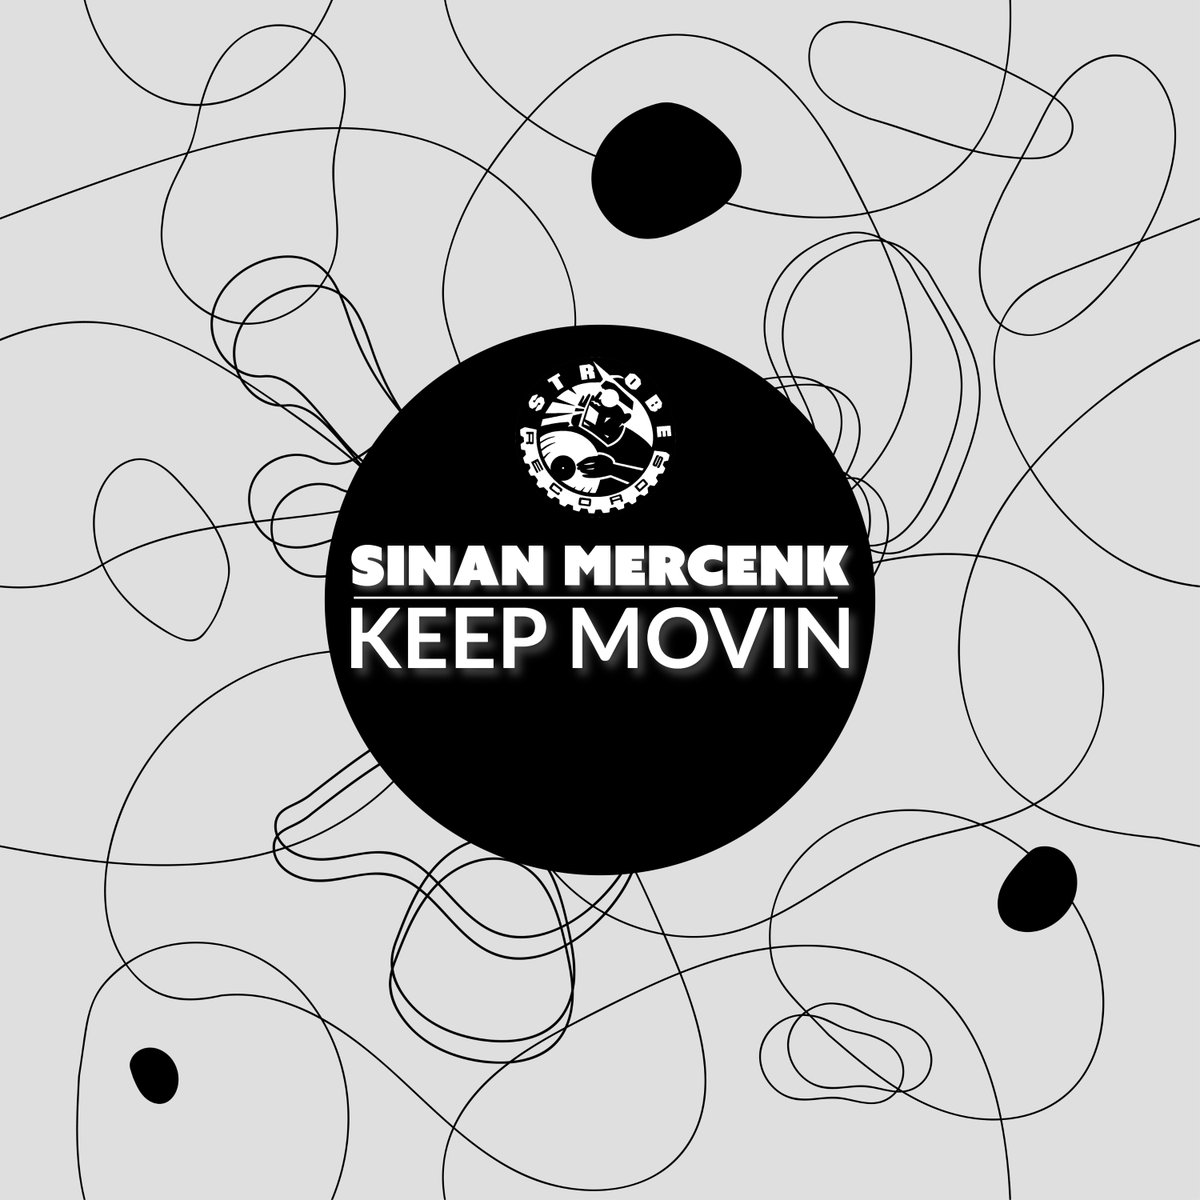 @stroberecords is thrilled to unveil its latest offering: the 'Keep Movin E.P.' by the multi-talented producer, songwriter, and DJ, Sinan Mercenk. Listen bit.ly/3VM256m #deephouse #soulfulhouse #dj #electronica #housemusic